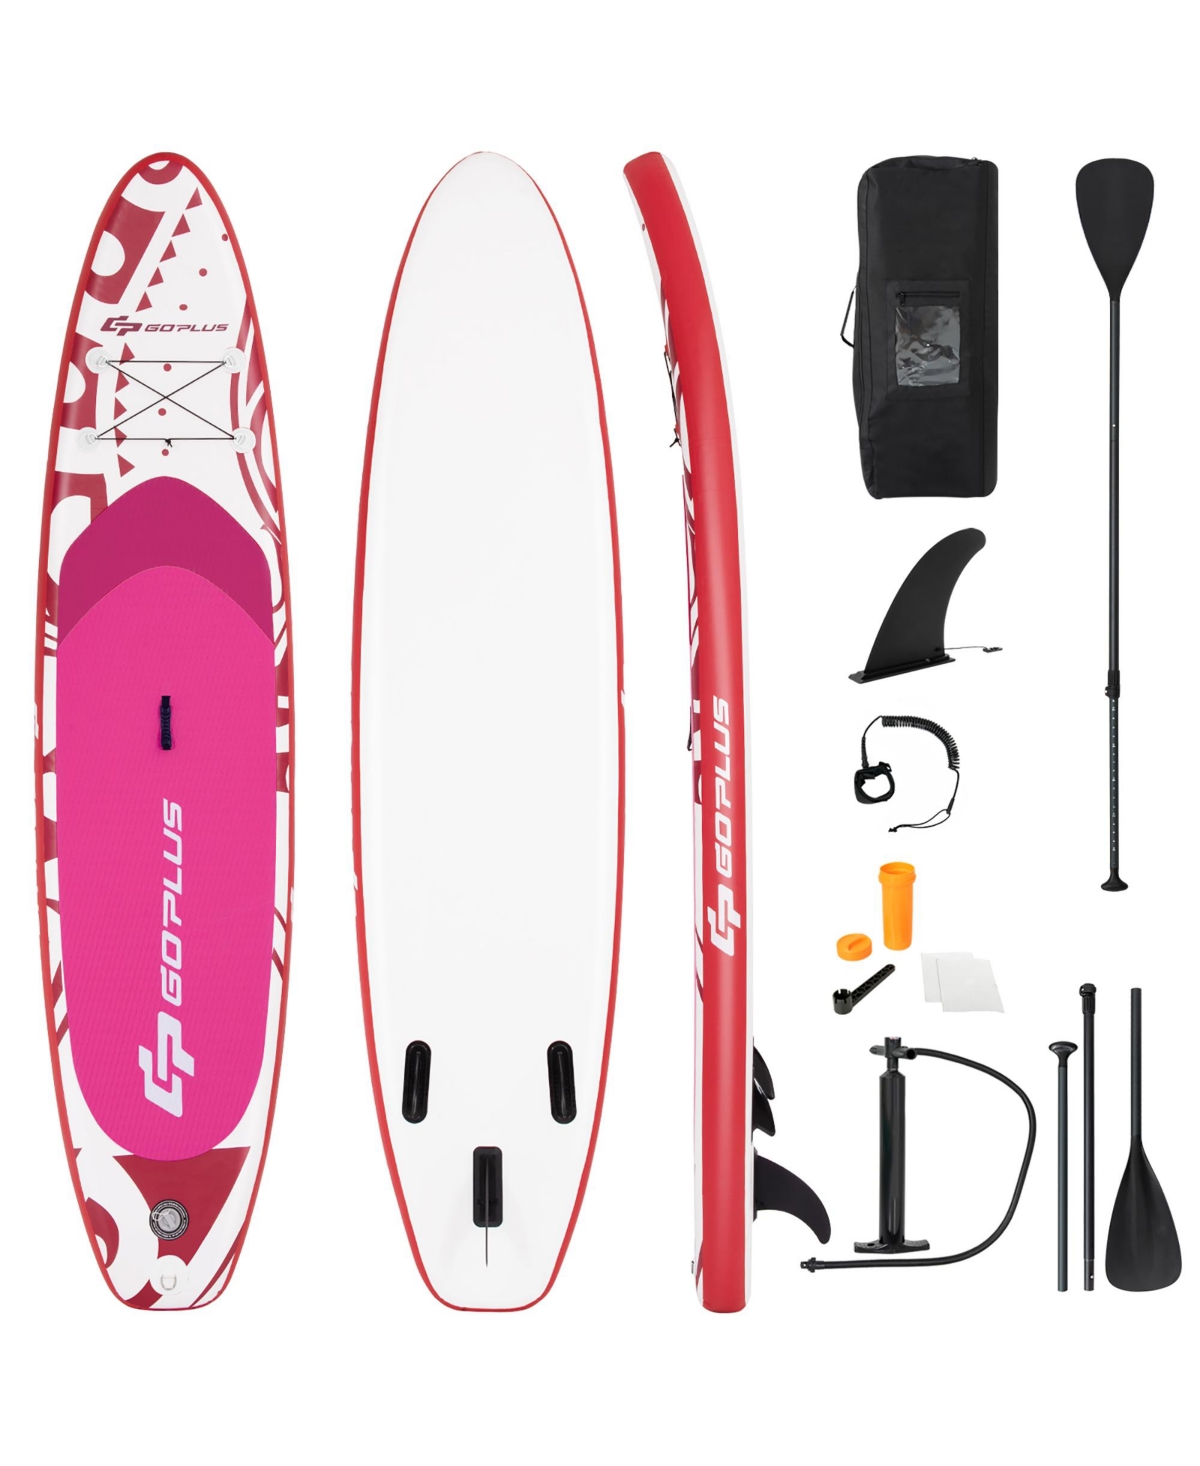 11' Inflatable Stand Up Paddle Board Sup Surfboard - Pink